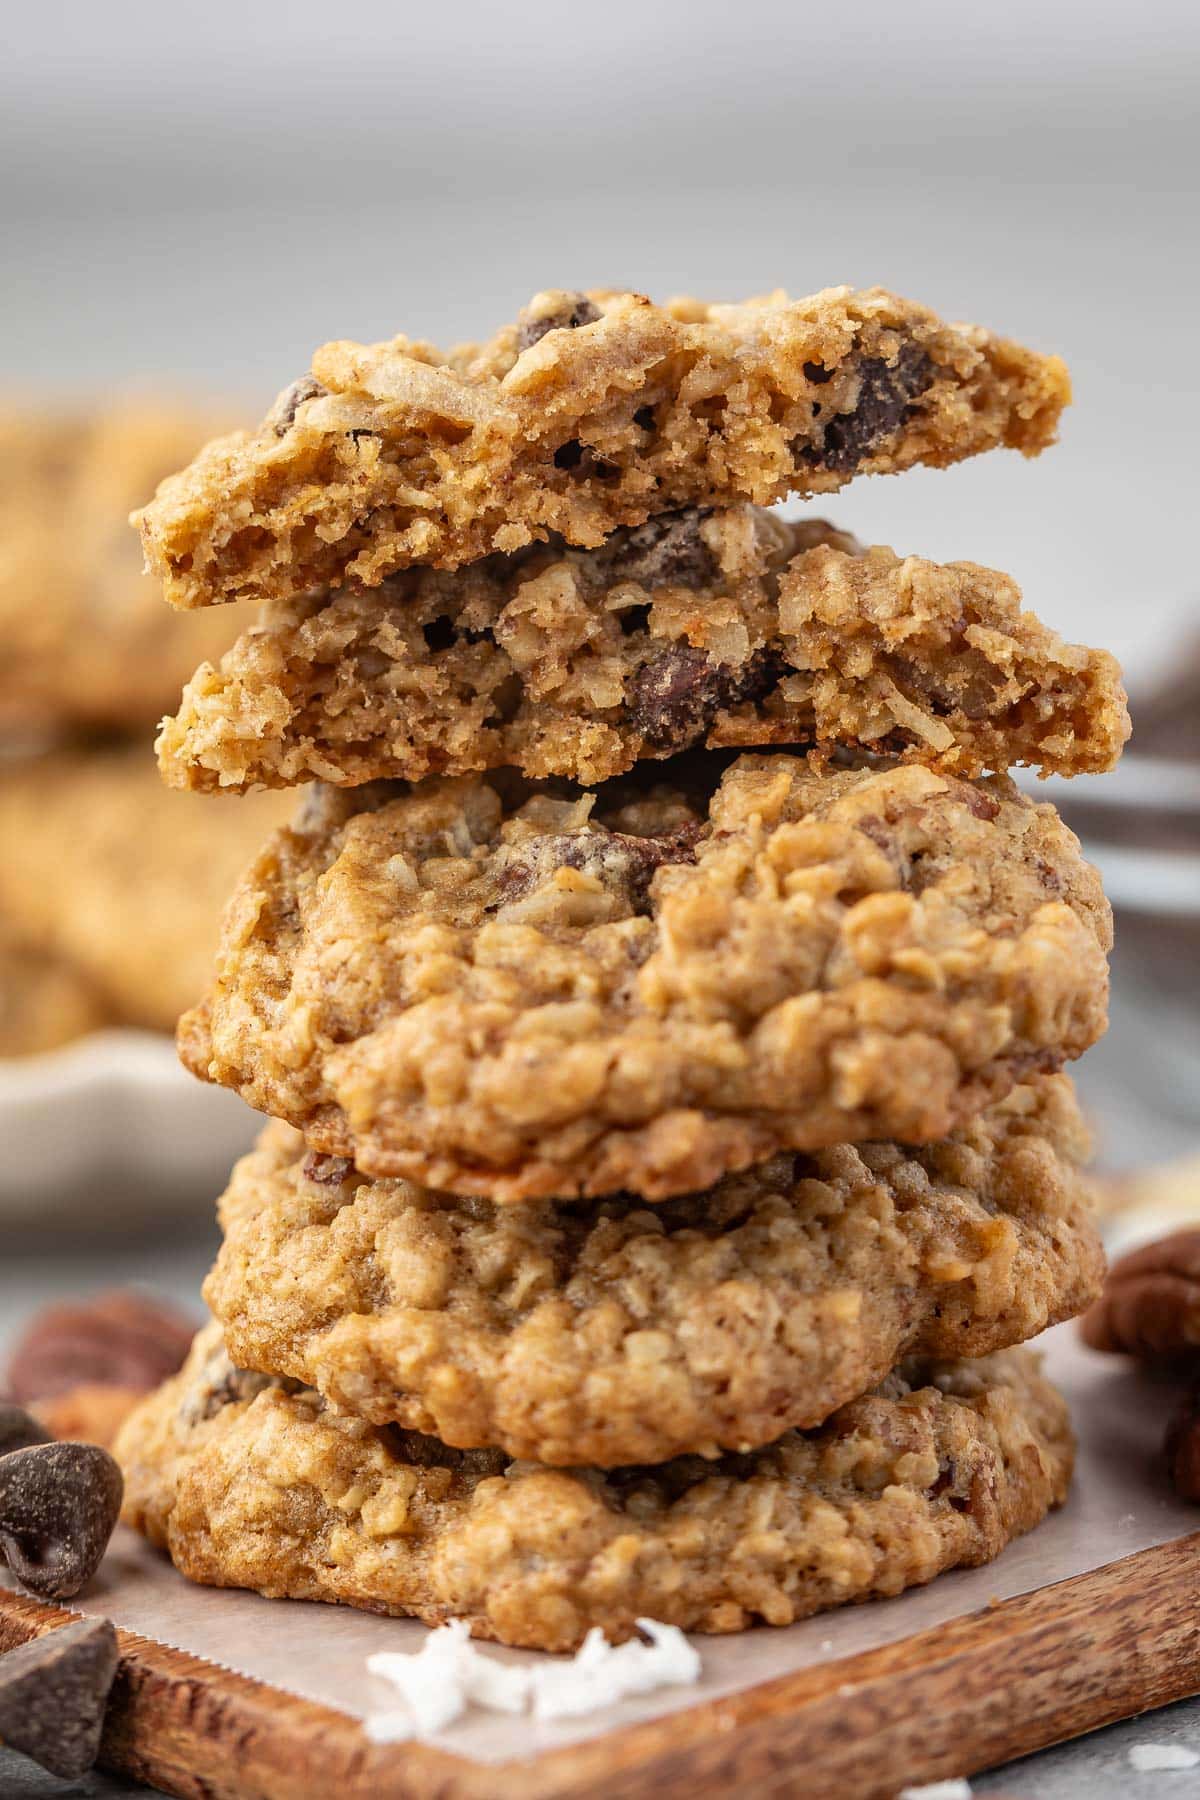 stacked cookies with coconut and chocolate chips and pecans baked in.